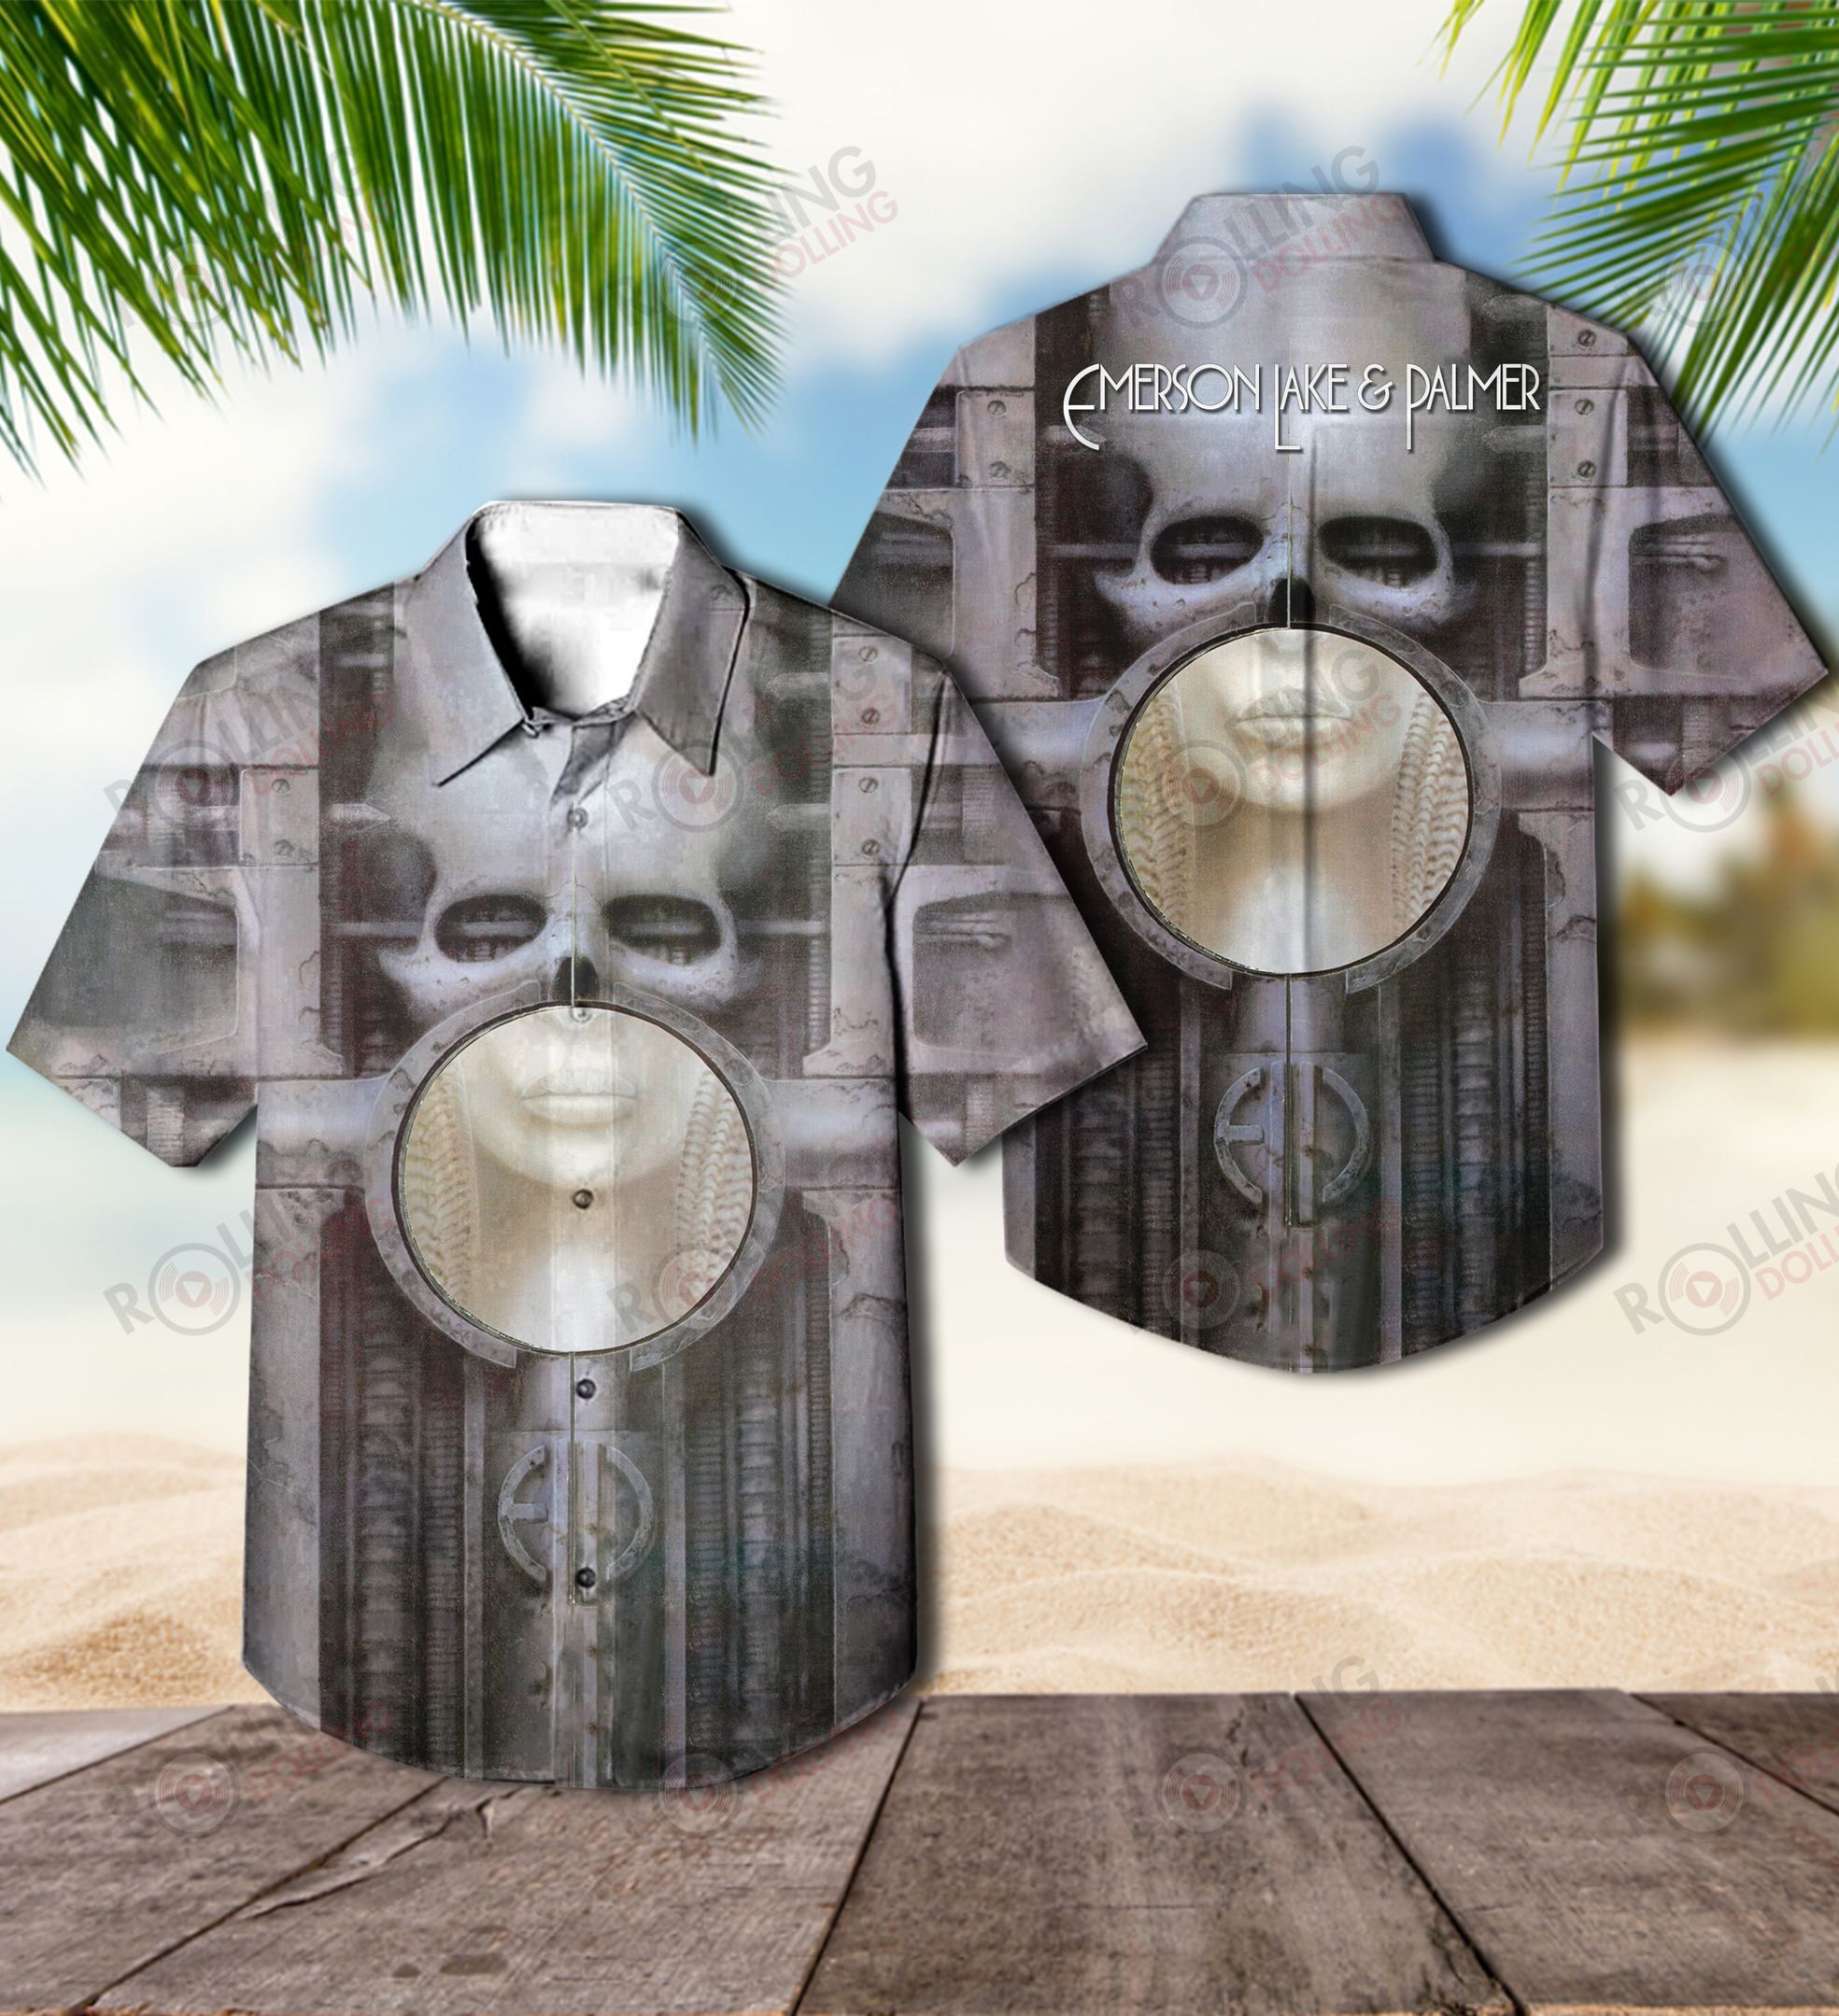 For summer, consider wearing This Amazing Hawaiian Shirt shirt in our store 67